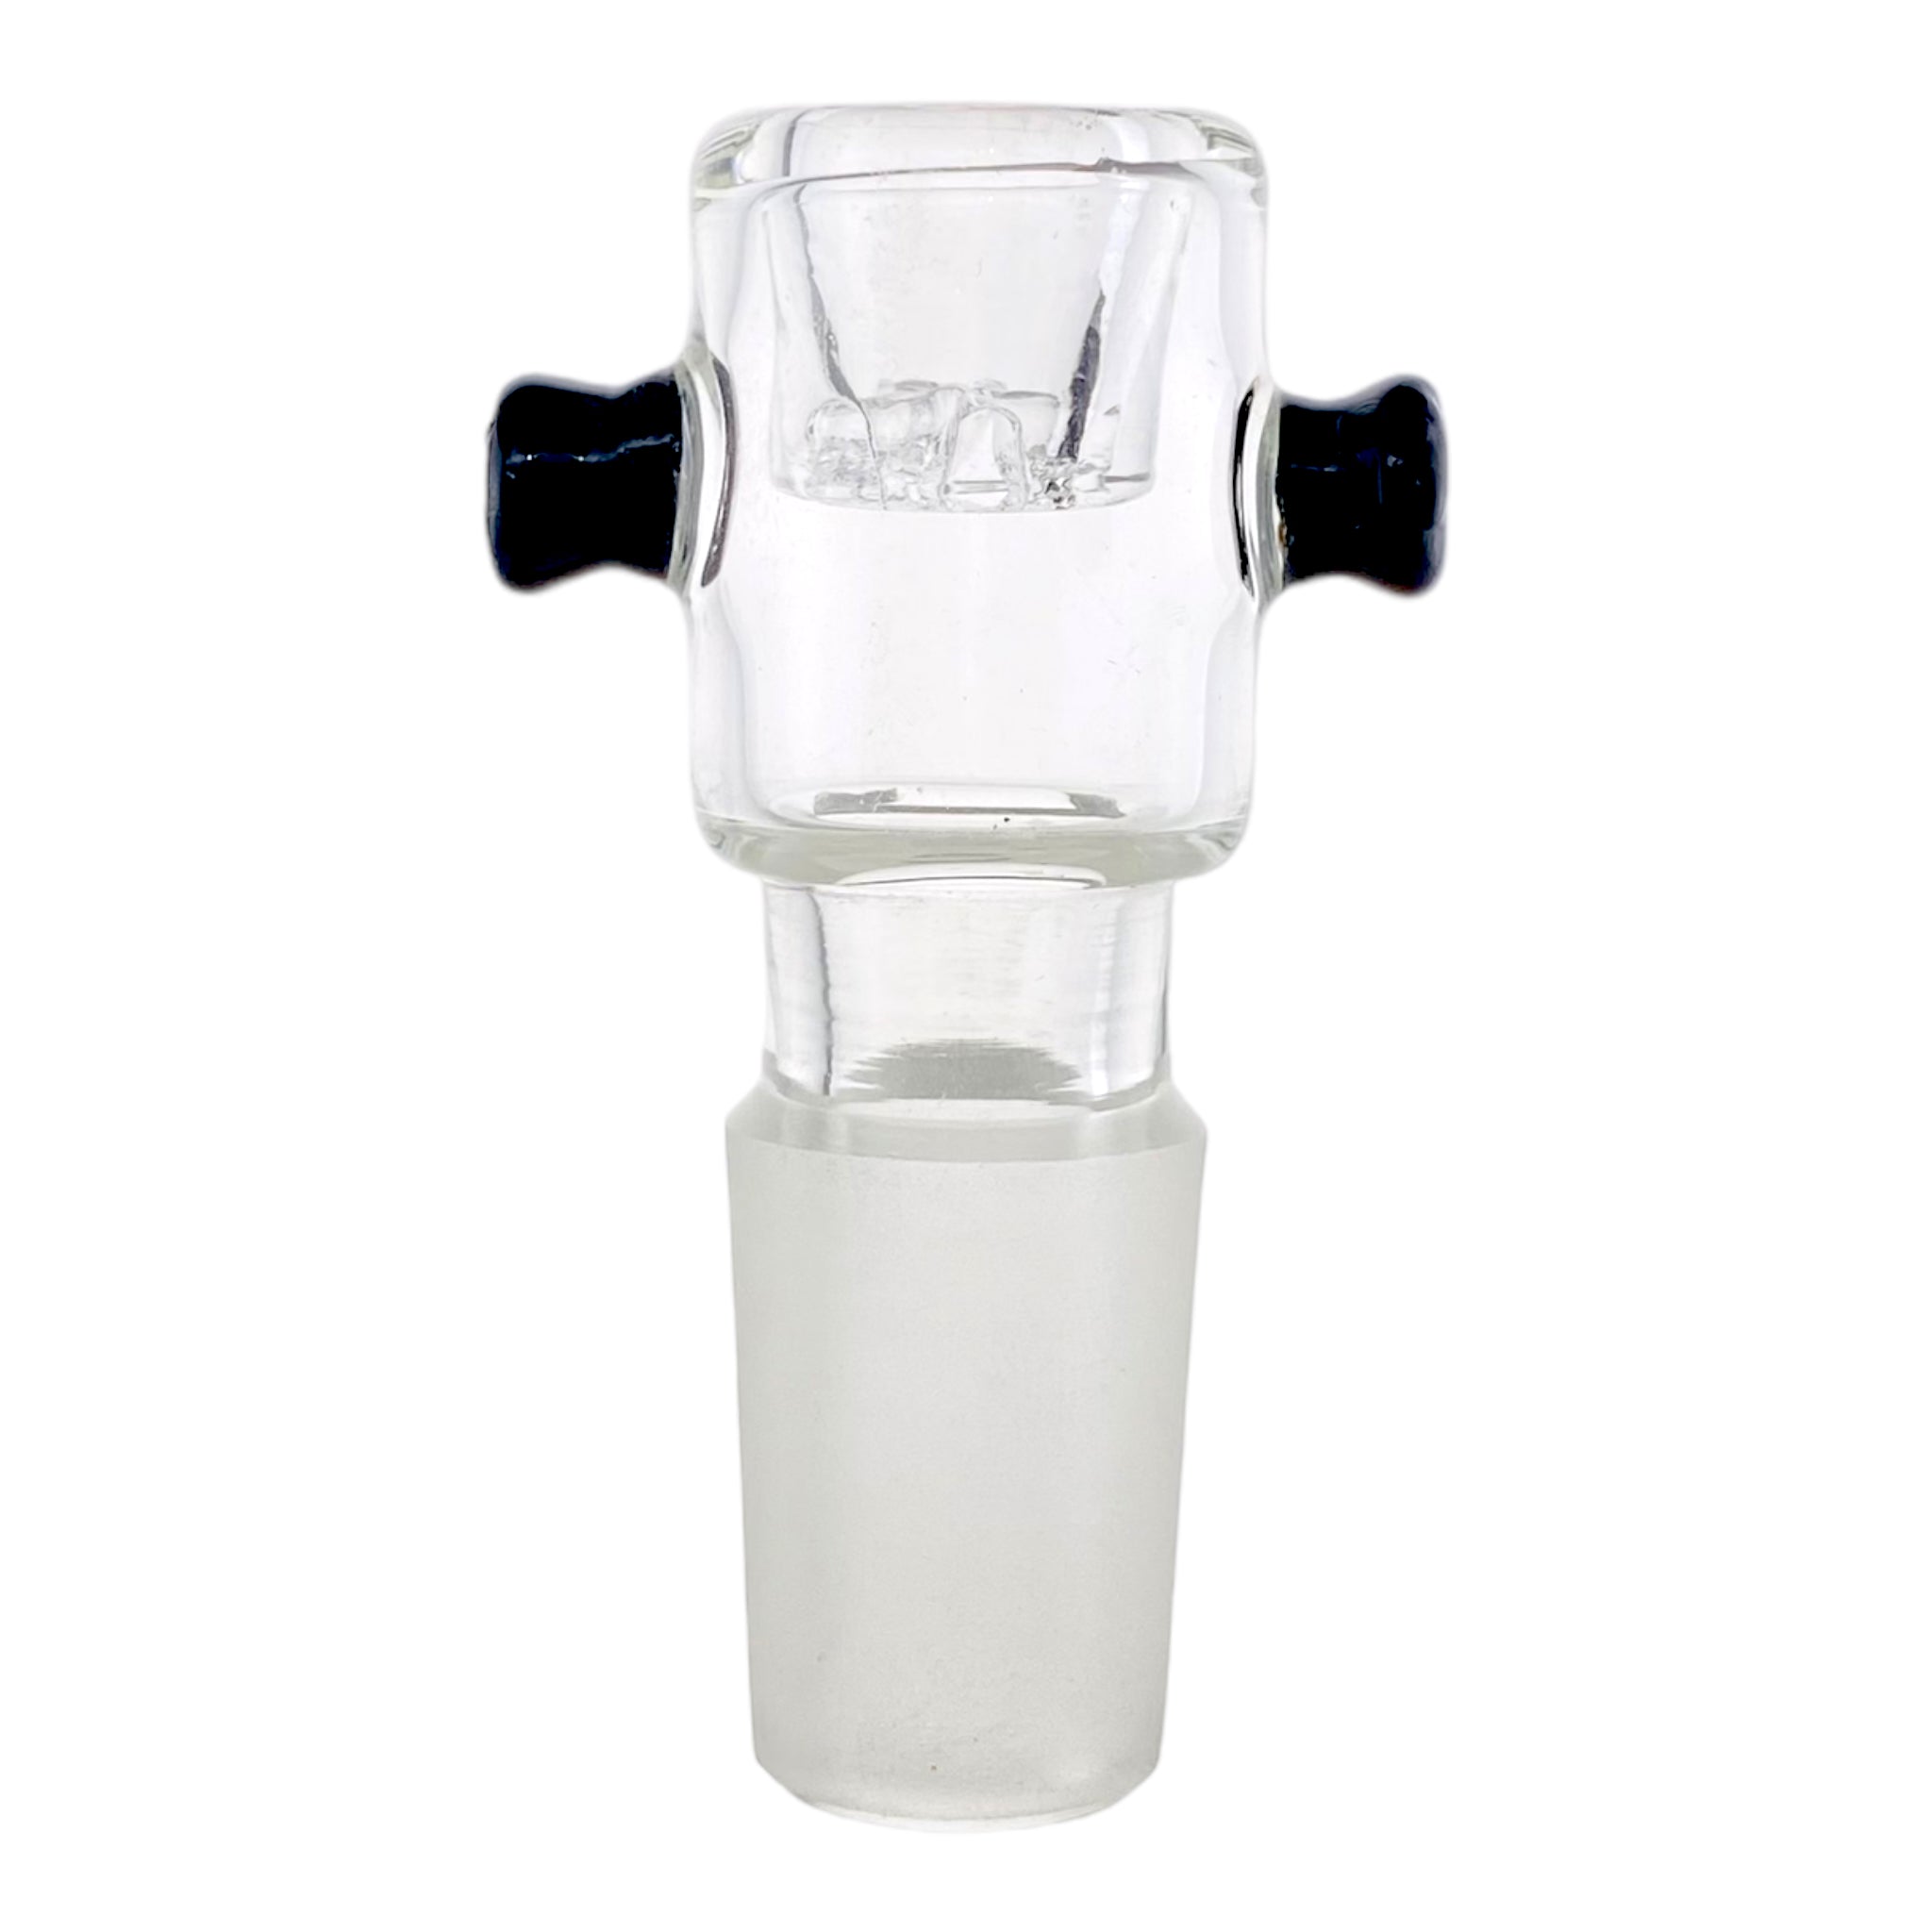 18mm Flower Bowl - Tall Cylinder Bong Bowl Piece With Built In Screen - Clear